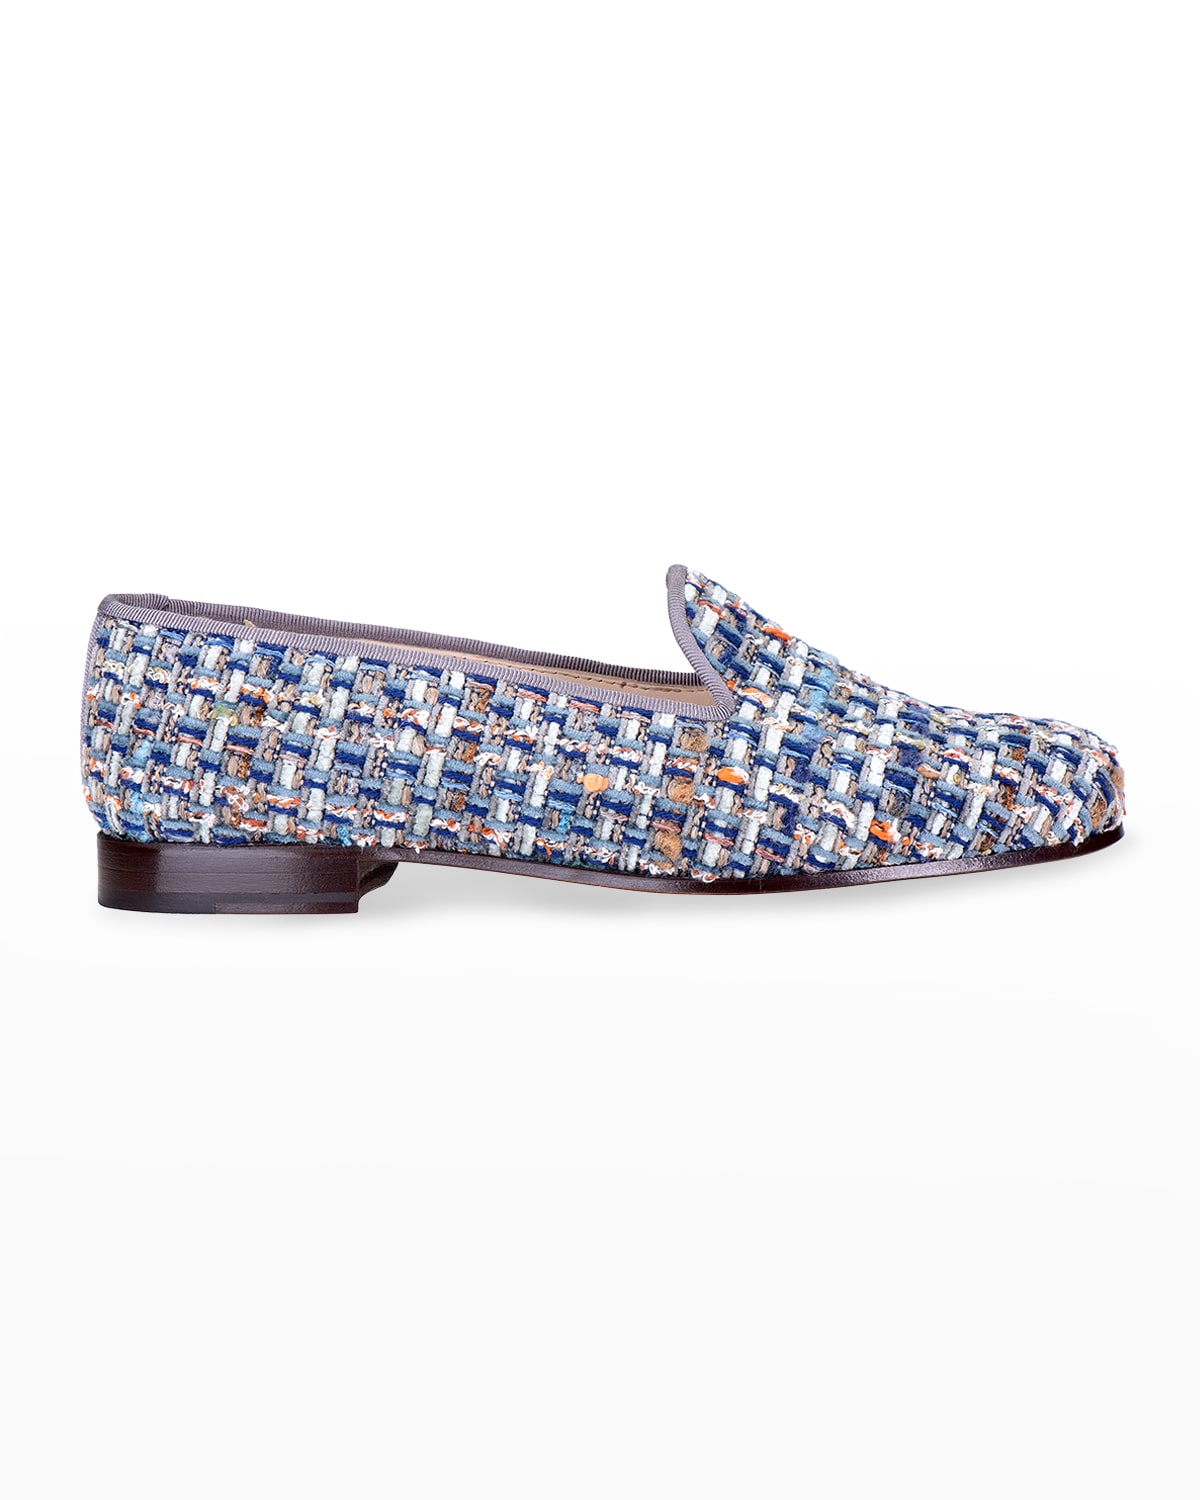 Stubbs and Wootton Harlow Needlepoint Smoking Loafers | Neiman Marcus